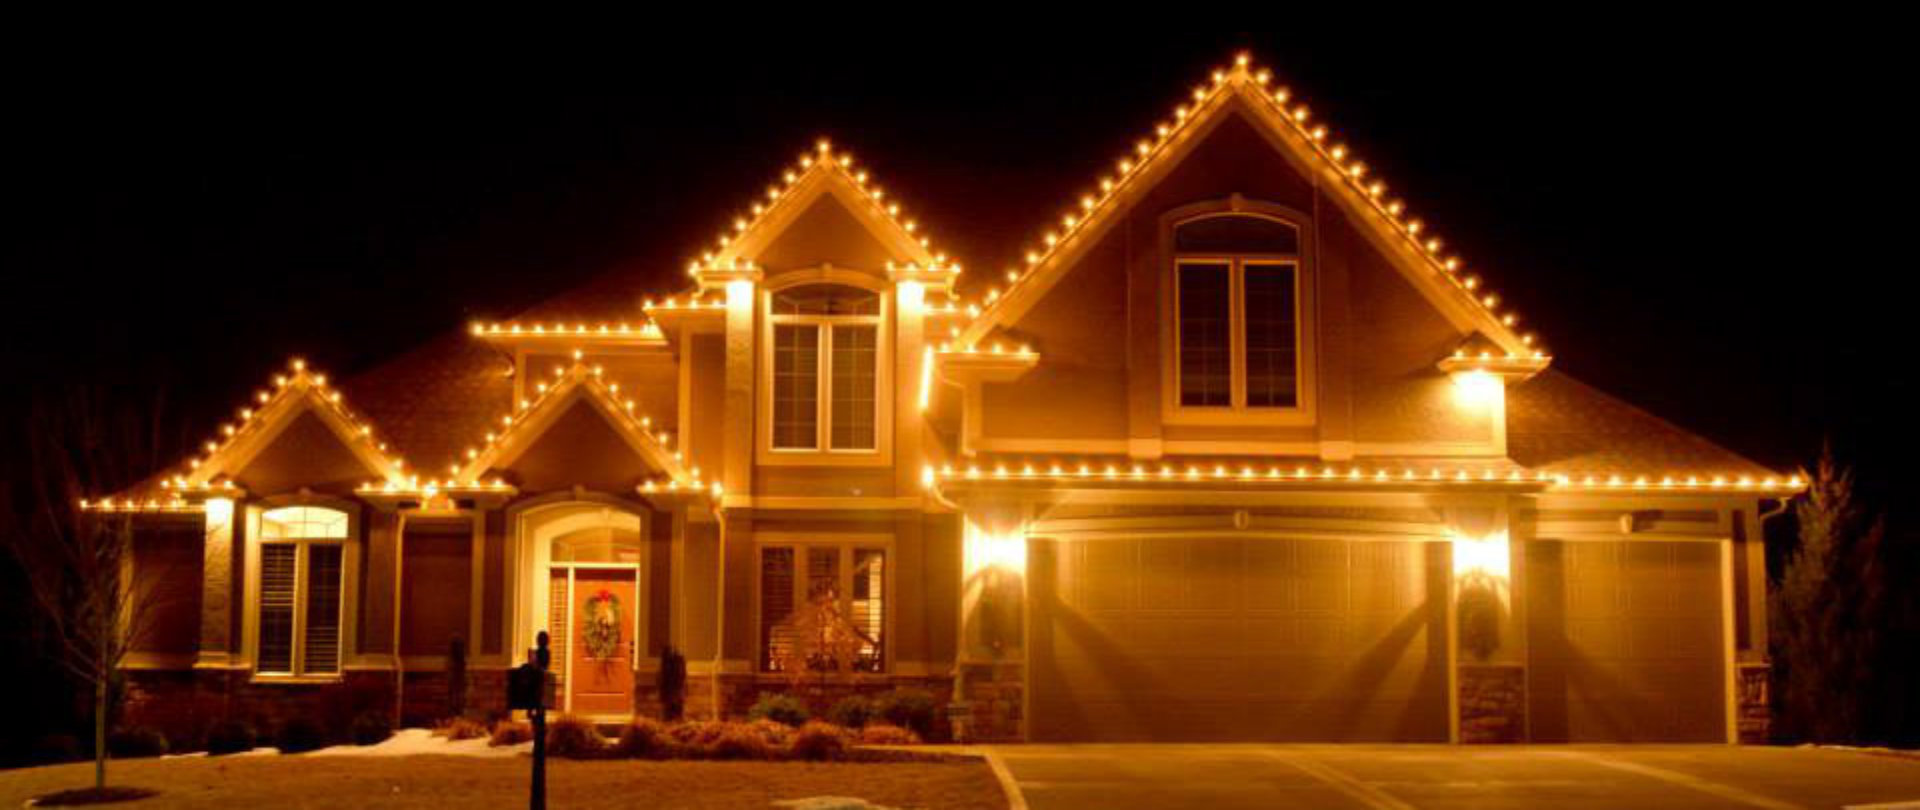 Paxton Holiday Lighting Residential